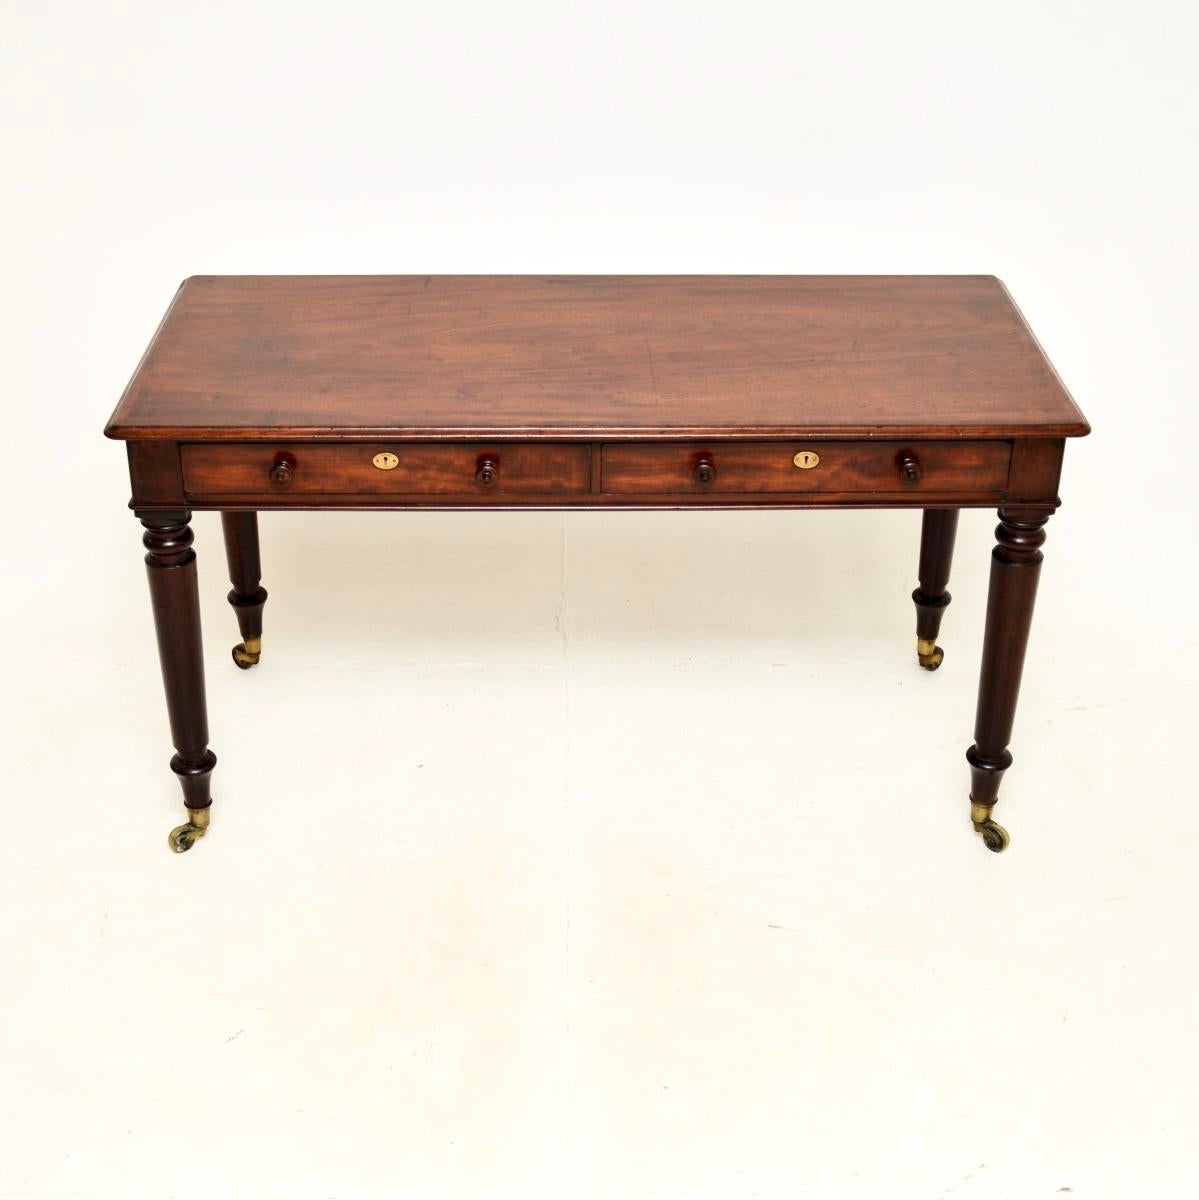 A fantastic antique Georgian writing table / desk of the highest order. This was made in England, it dates from around the 1820’s period.

It is of outstanding quality, the top has cross banded edges, it sits on finely turned legs which have